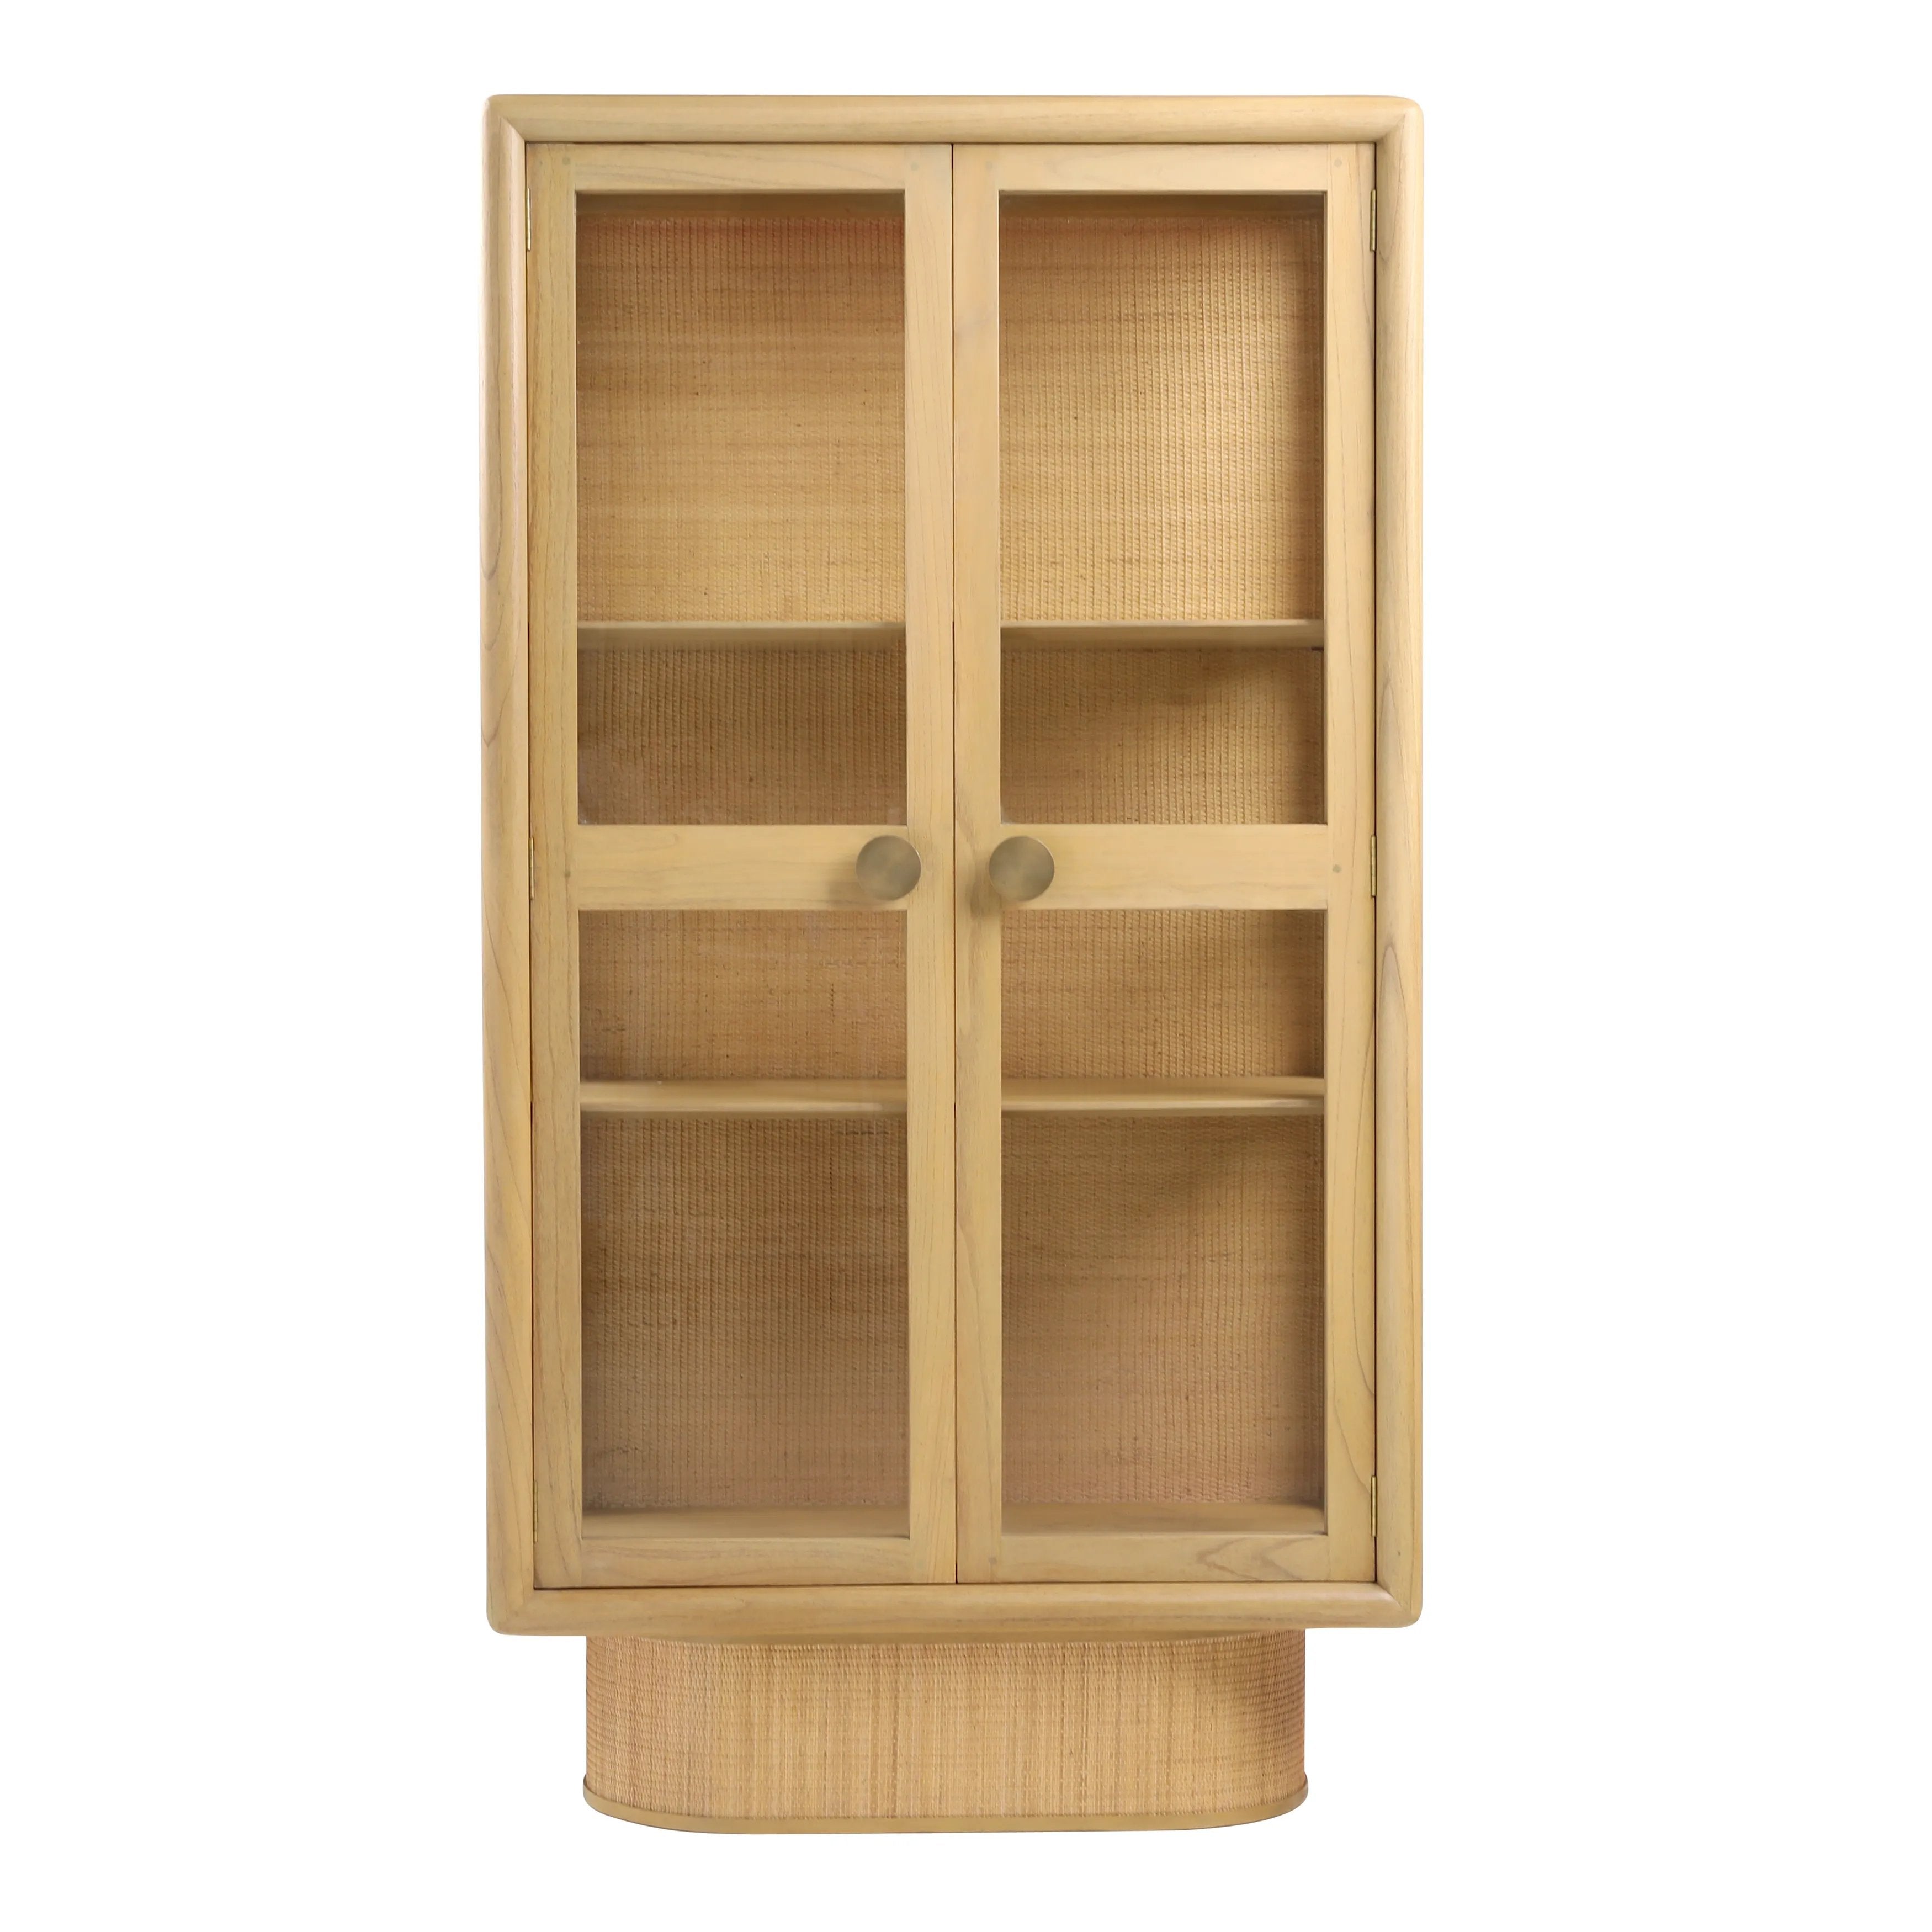 Make the most of your home's space with Crispina's Natural Cabinet! With its modern design and classic materials, this sturdy cabinet is perfect for stylish storage Amethyst Home provides interior design, new home construction design consulting, vintage area rugs, and lighting in the Houston metro area.